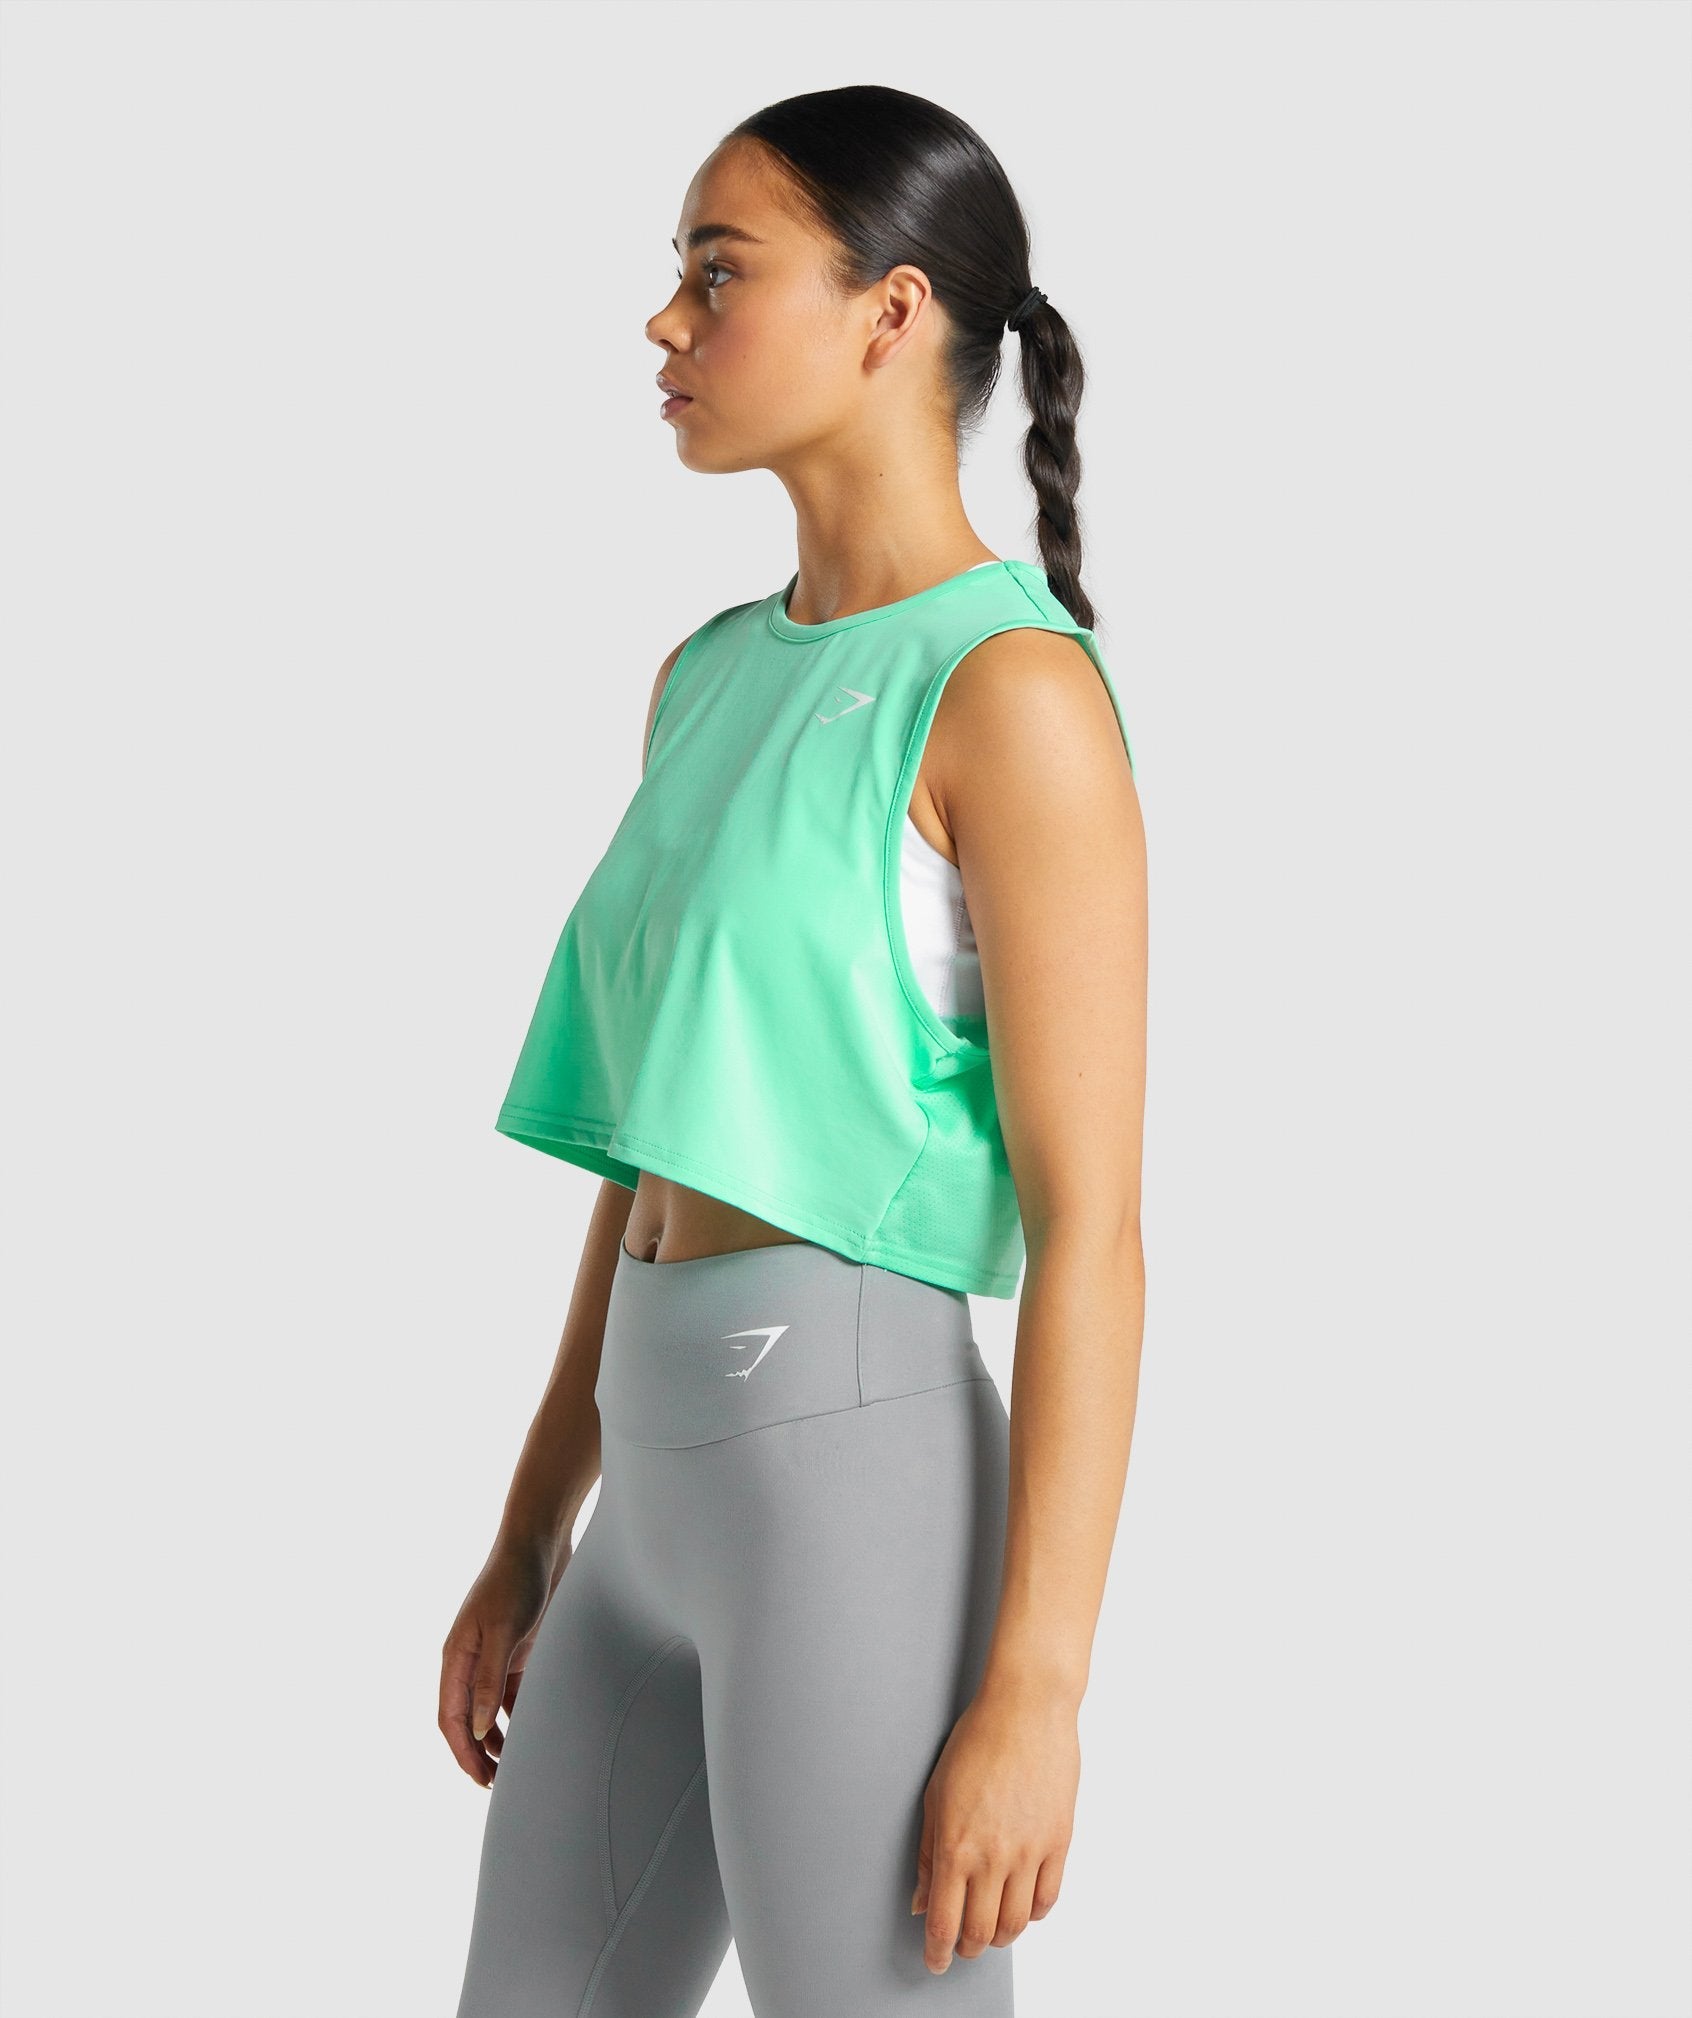 Training Crop Tank in Turquoise - view 3